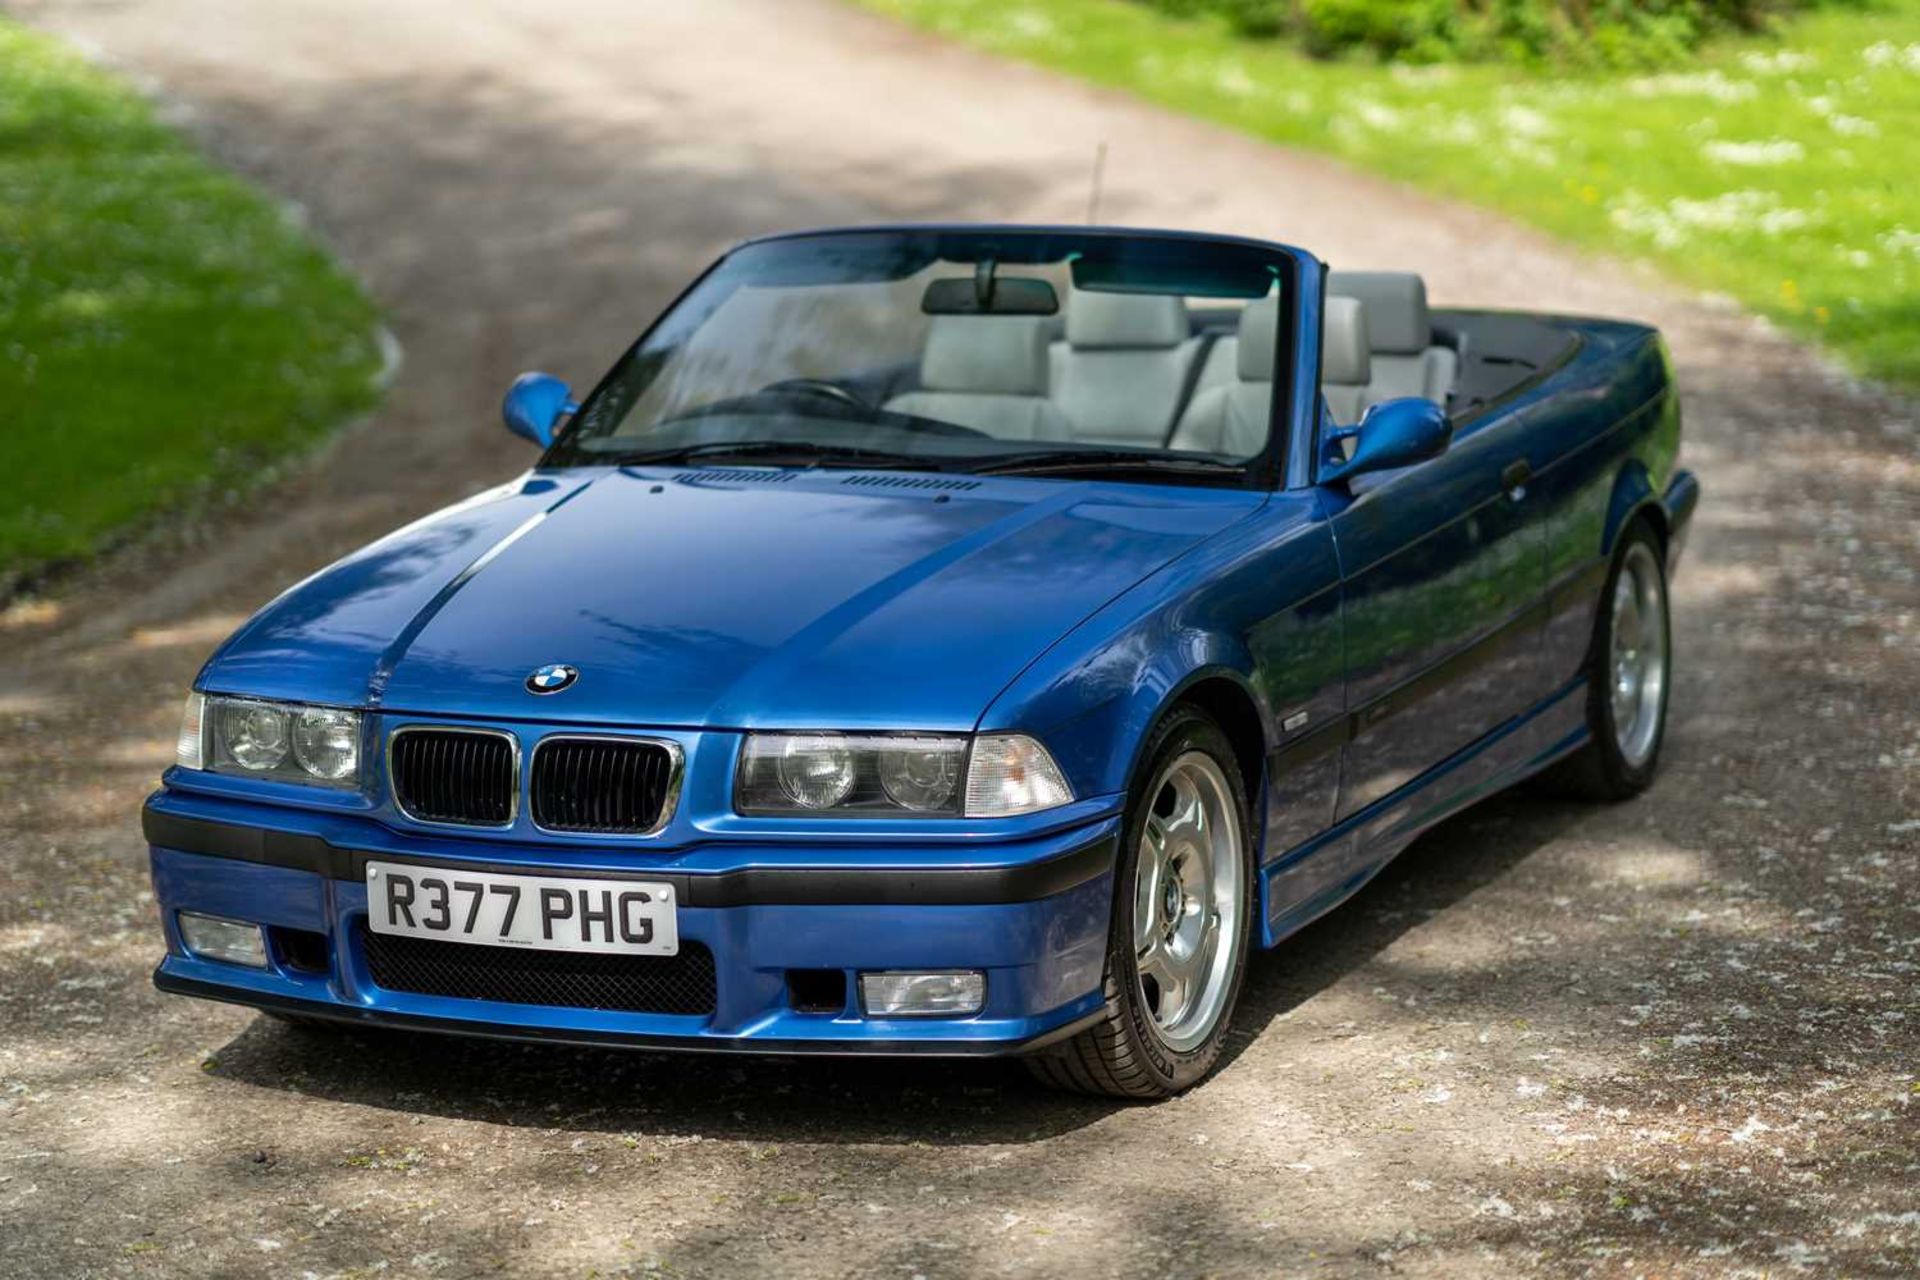 1998 BMW M3 Evolution Convertible Only 54,000 miles and full service history - Image 74 of 89